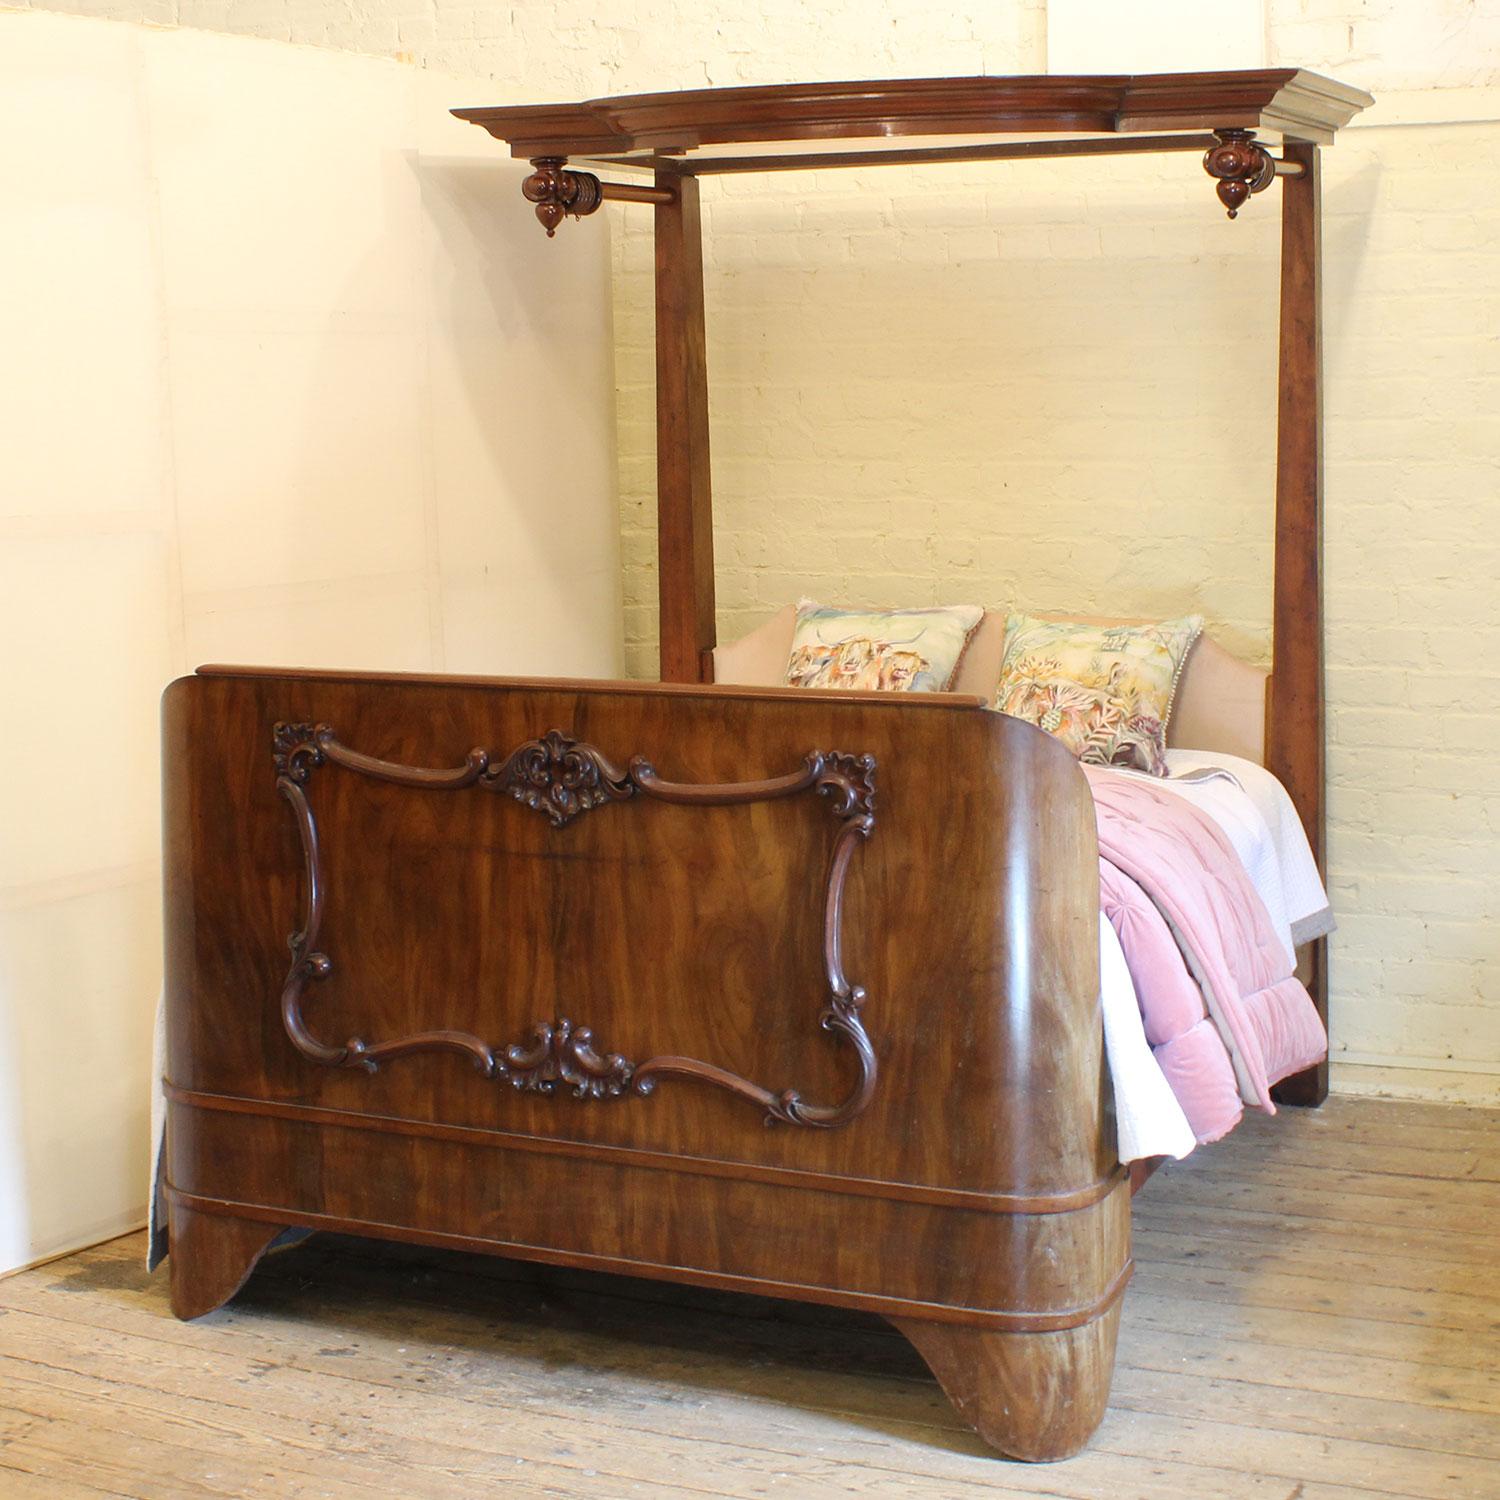 A magnificent mahogany Victorian half tester bed with flame veneer in the shaped foot panel, and serpentine shaped canopy with curtain rails and rings.
The upholstered back panel can be replaced and raised, and covered with a fabric of your chice.